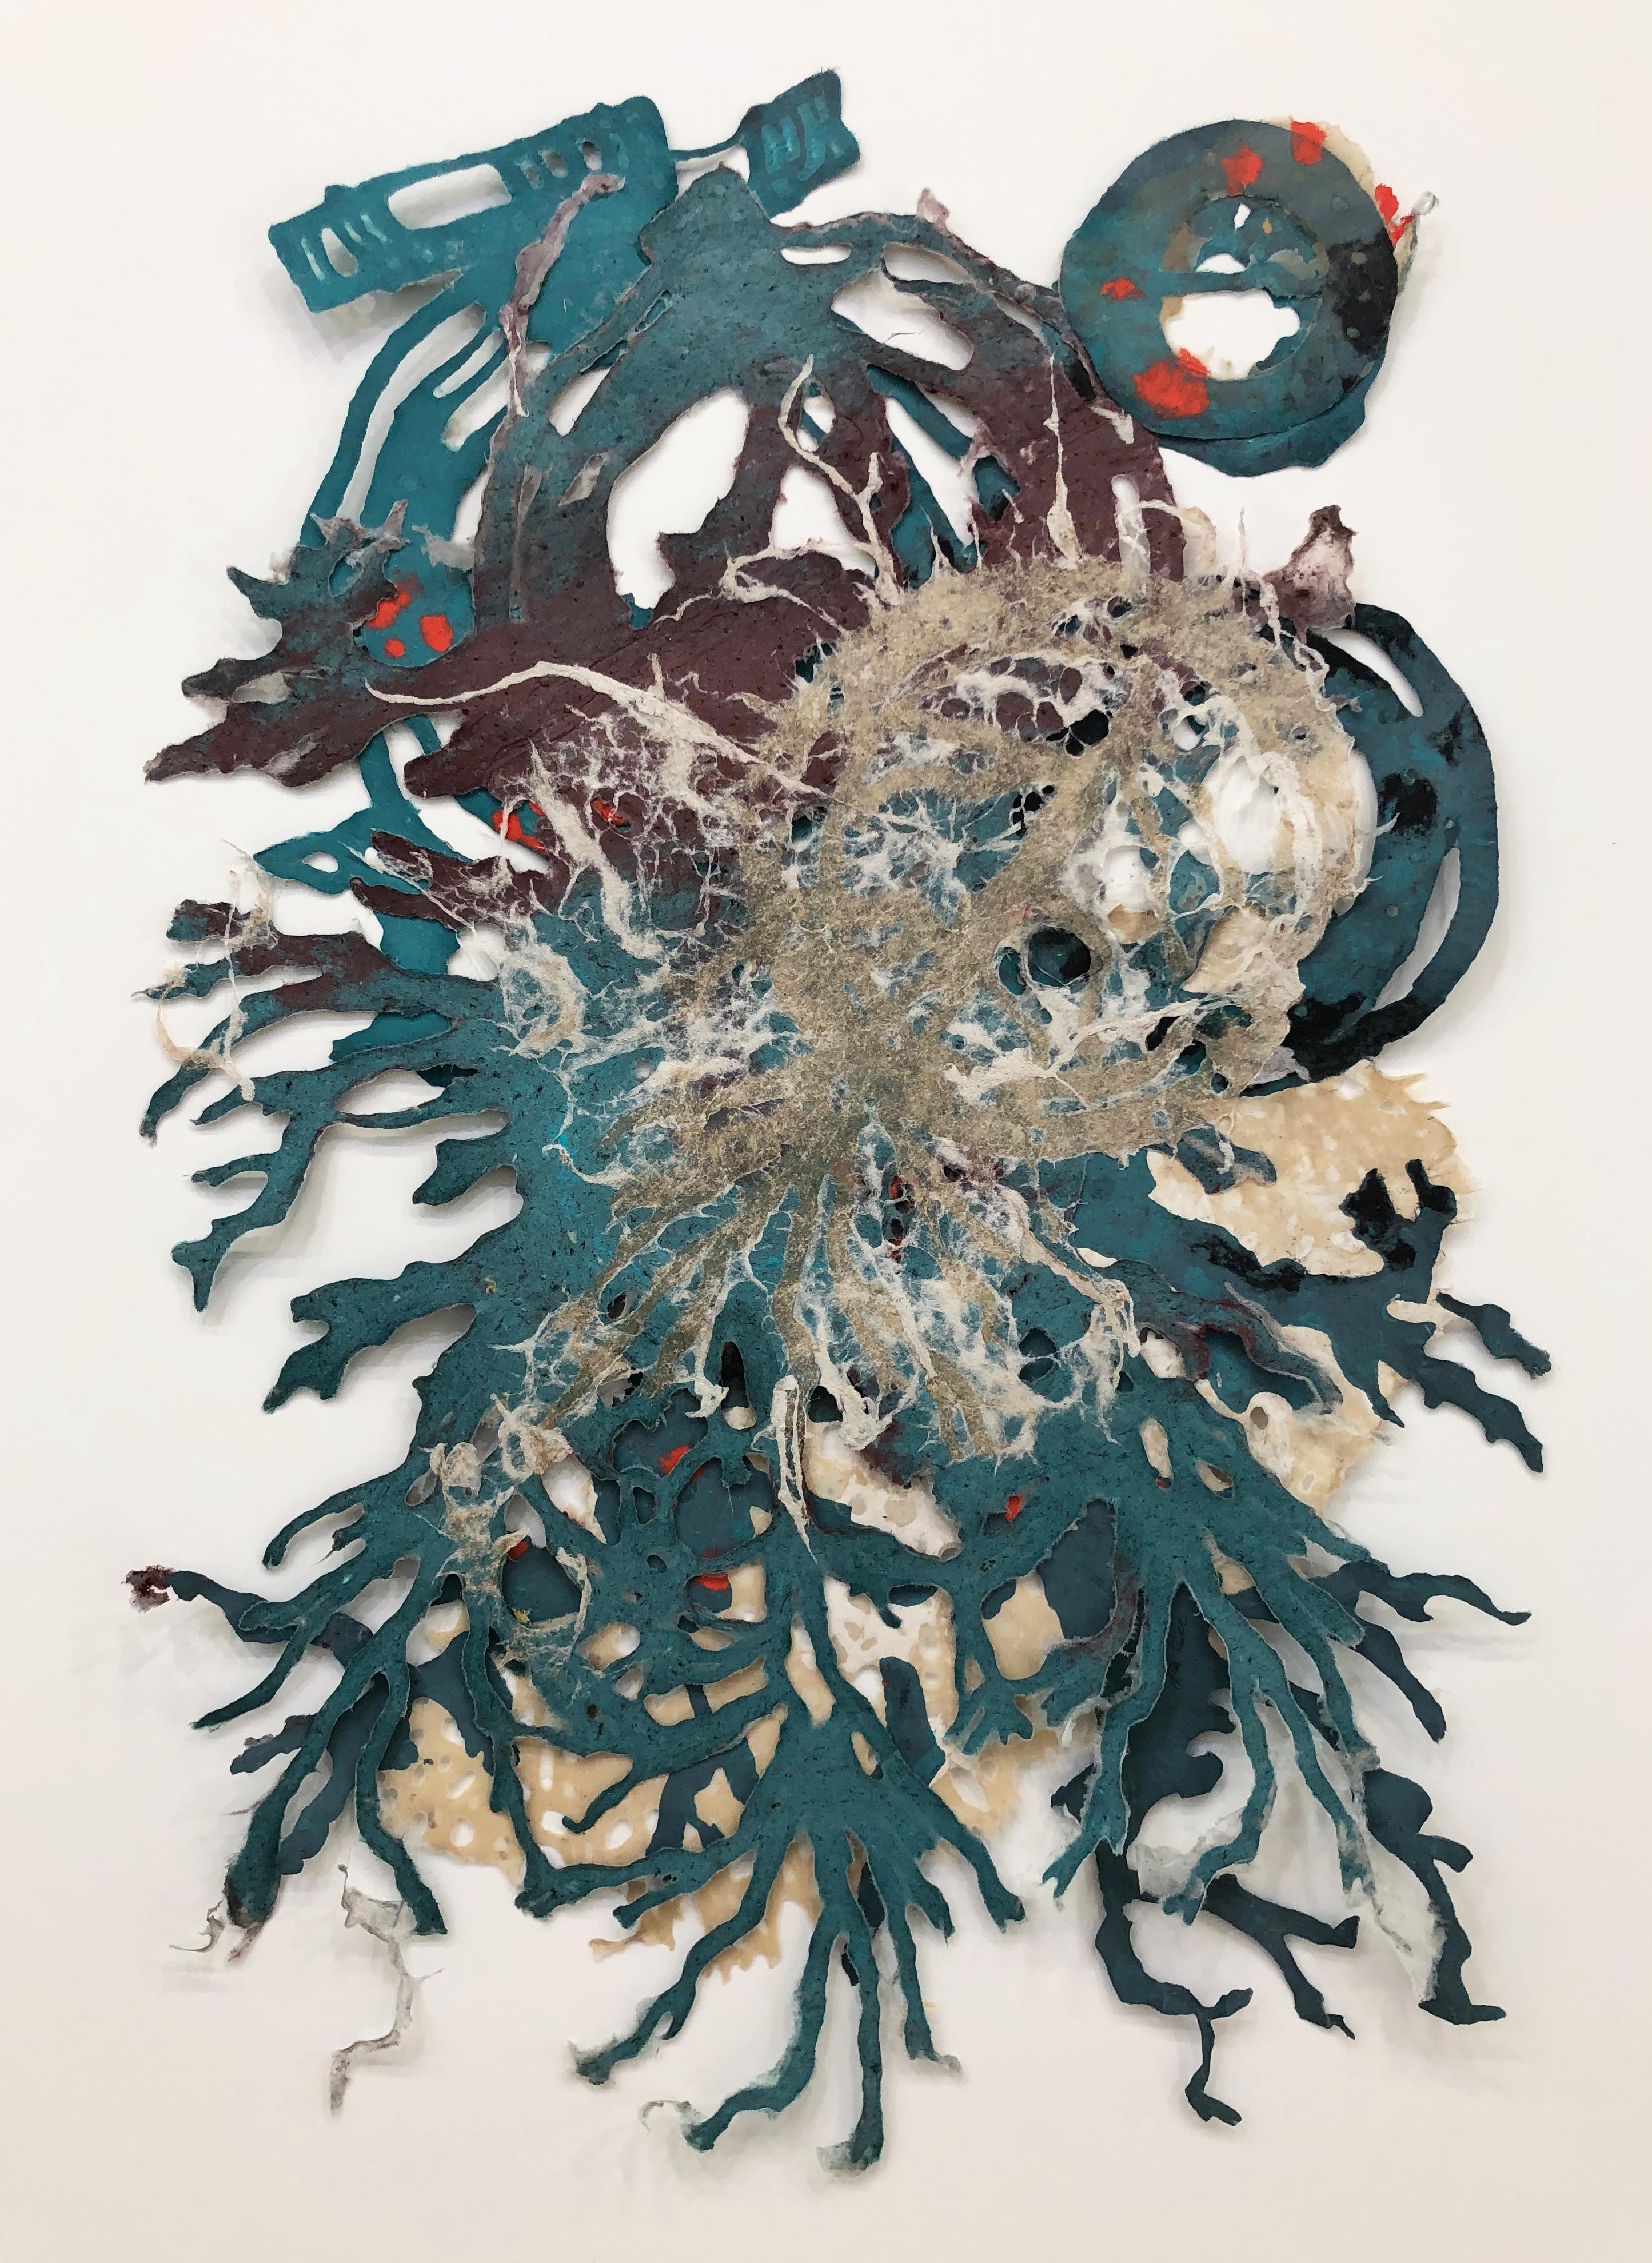 The New Living Reef #5 - Mixed Media Art by Joan Hall